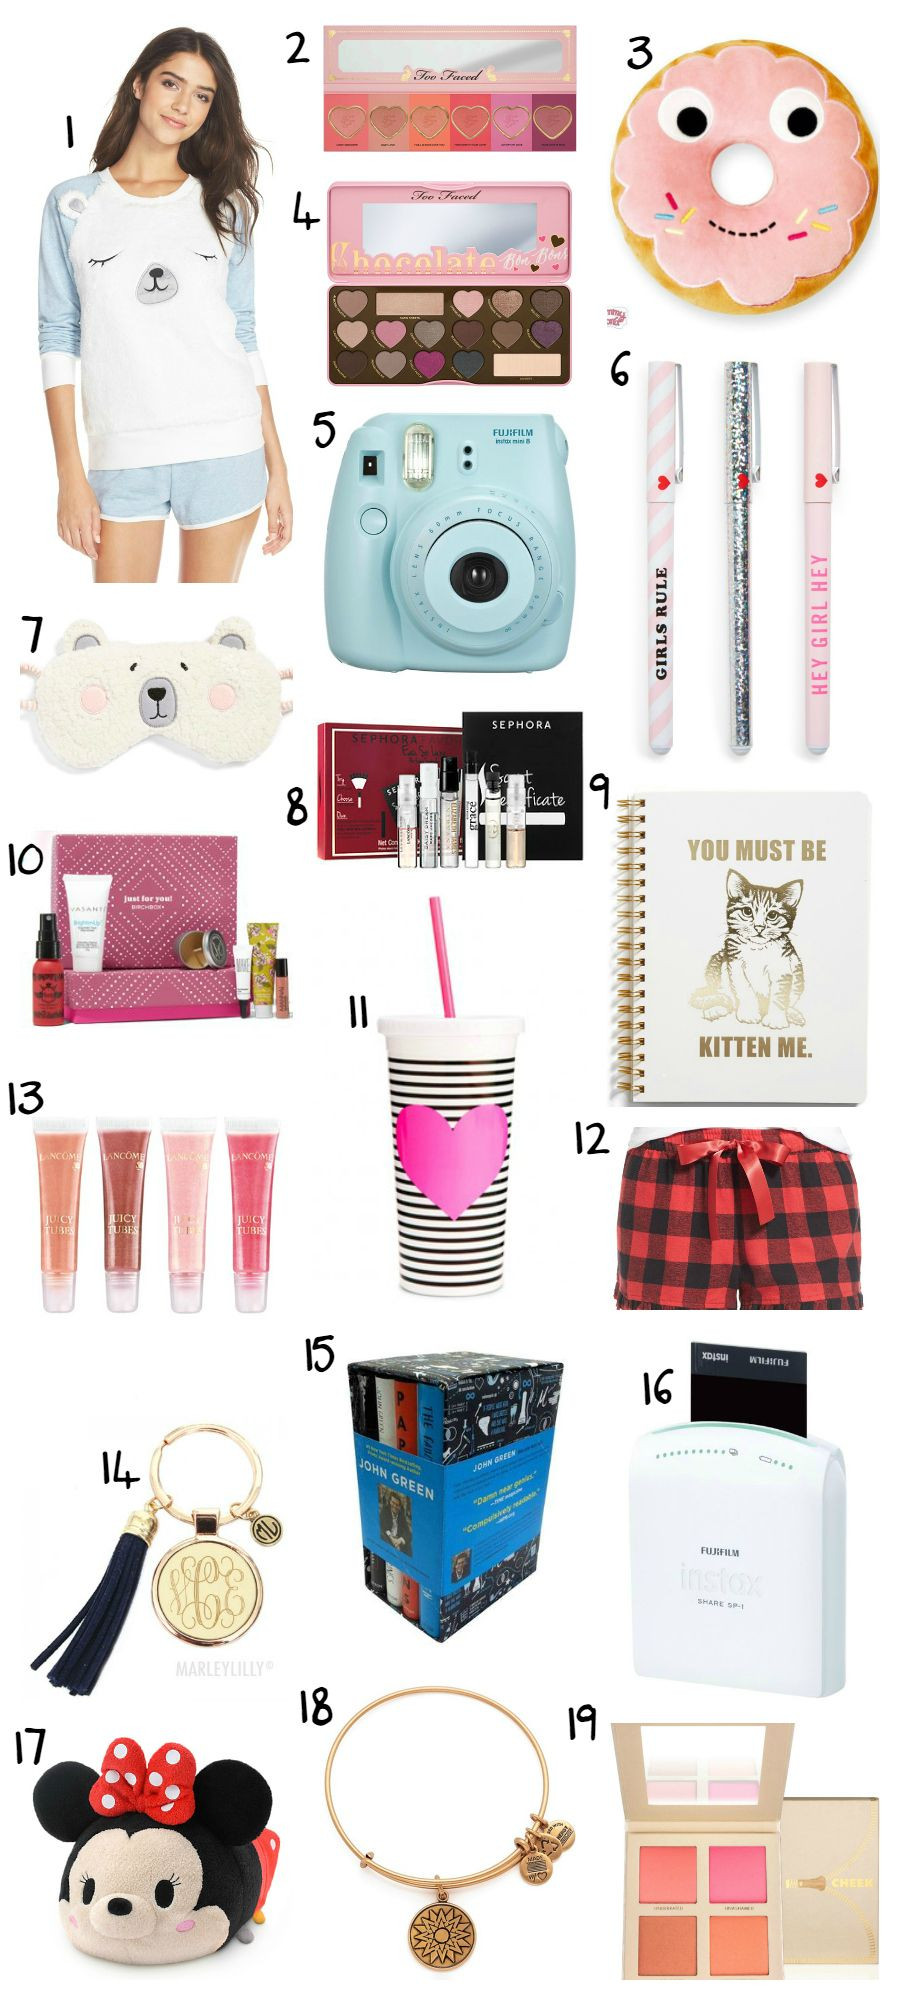 Christmas Gift Ideas For Girls
 The Best Christmas Gift Ideas for Teens